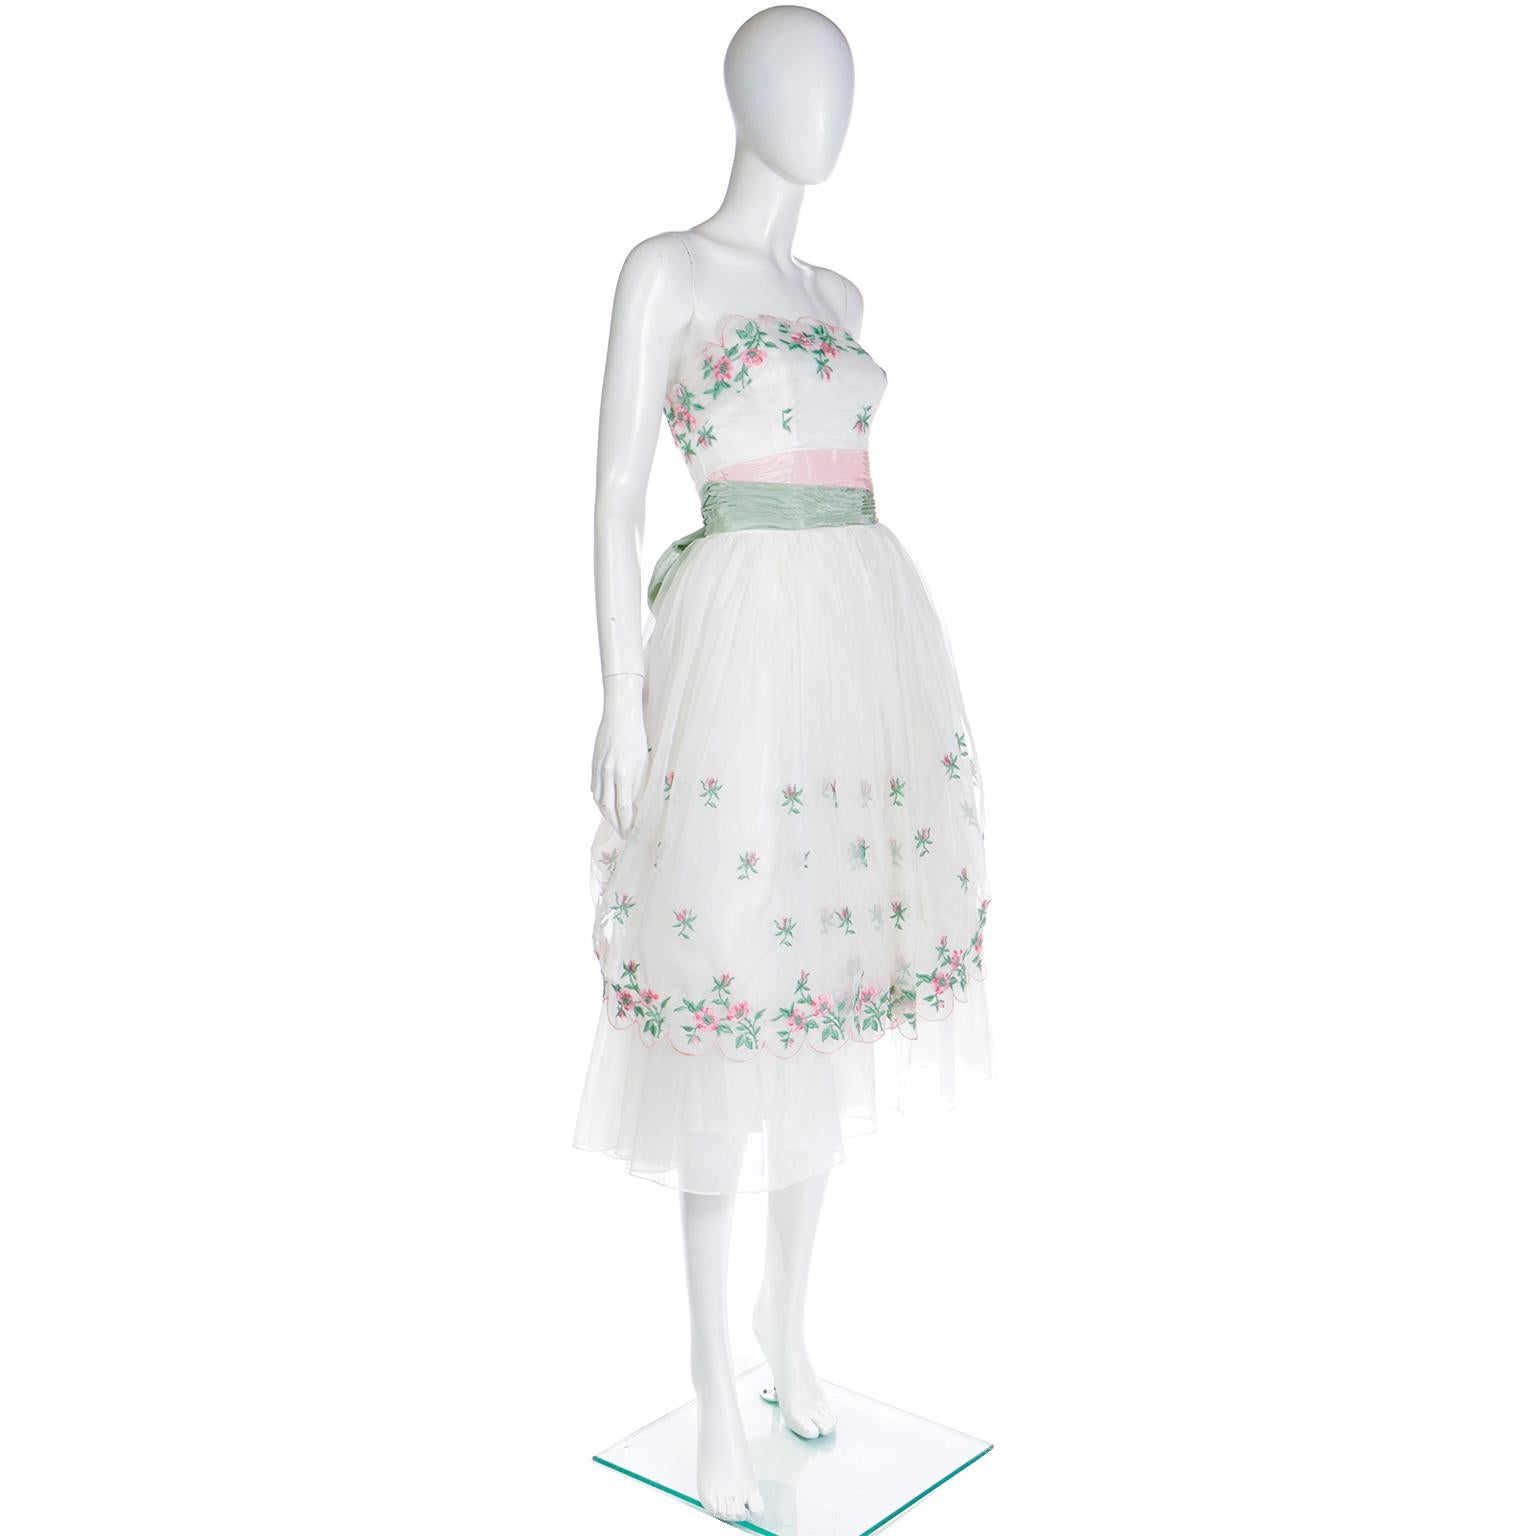 Emma Domb 1950's White Party Dress w Pink and Green Embroidered Flowers For Sale 1